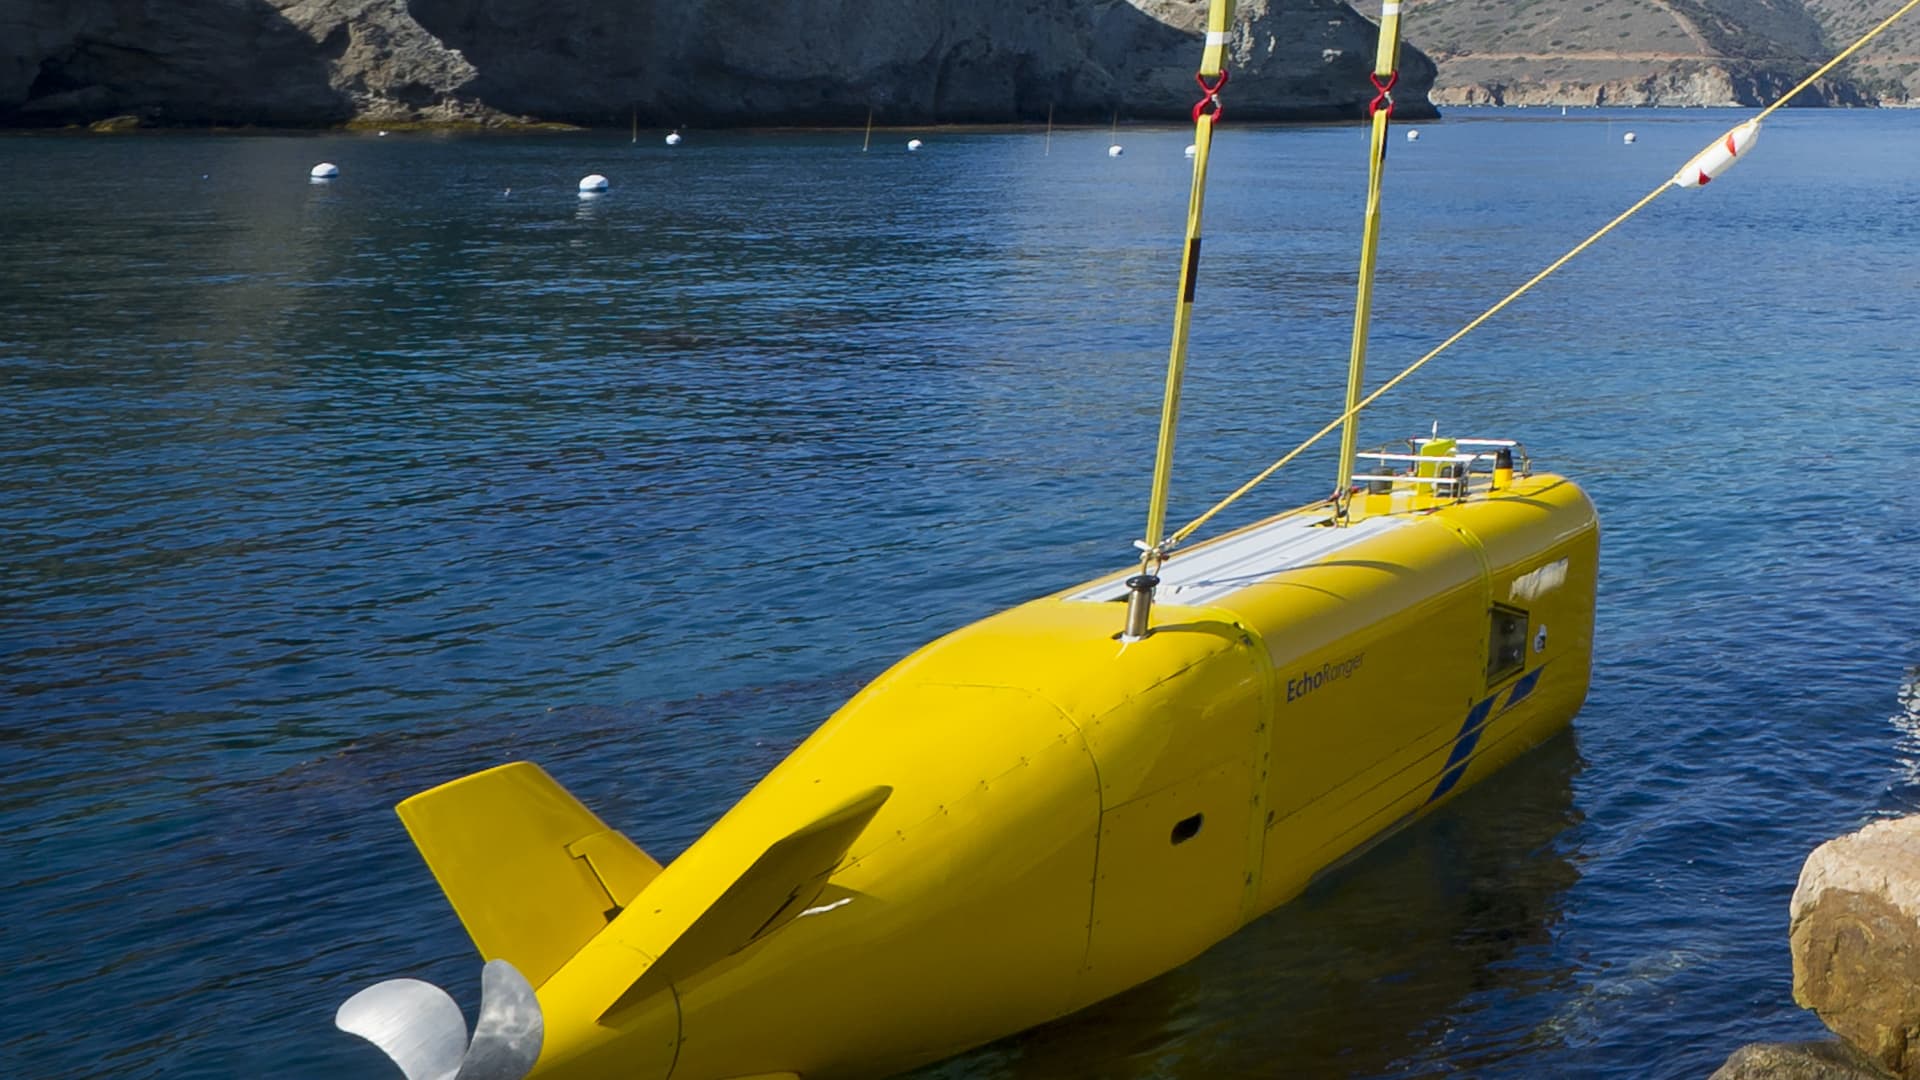 One of the biggest autonomous transportation tests is operating deep underwater